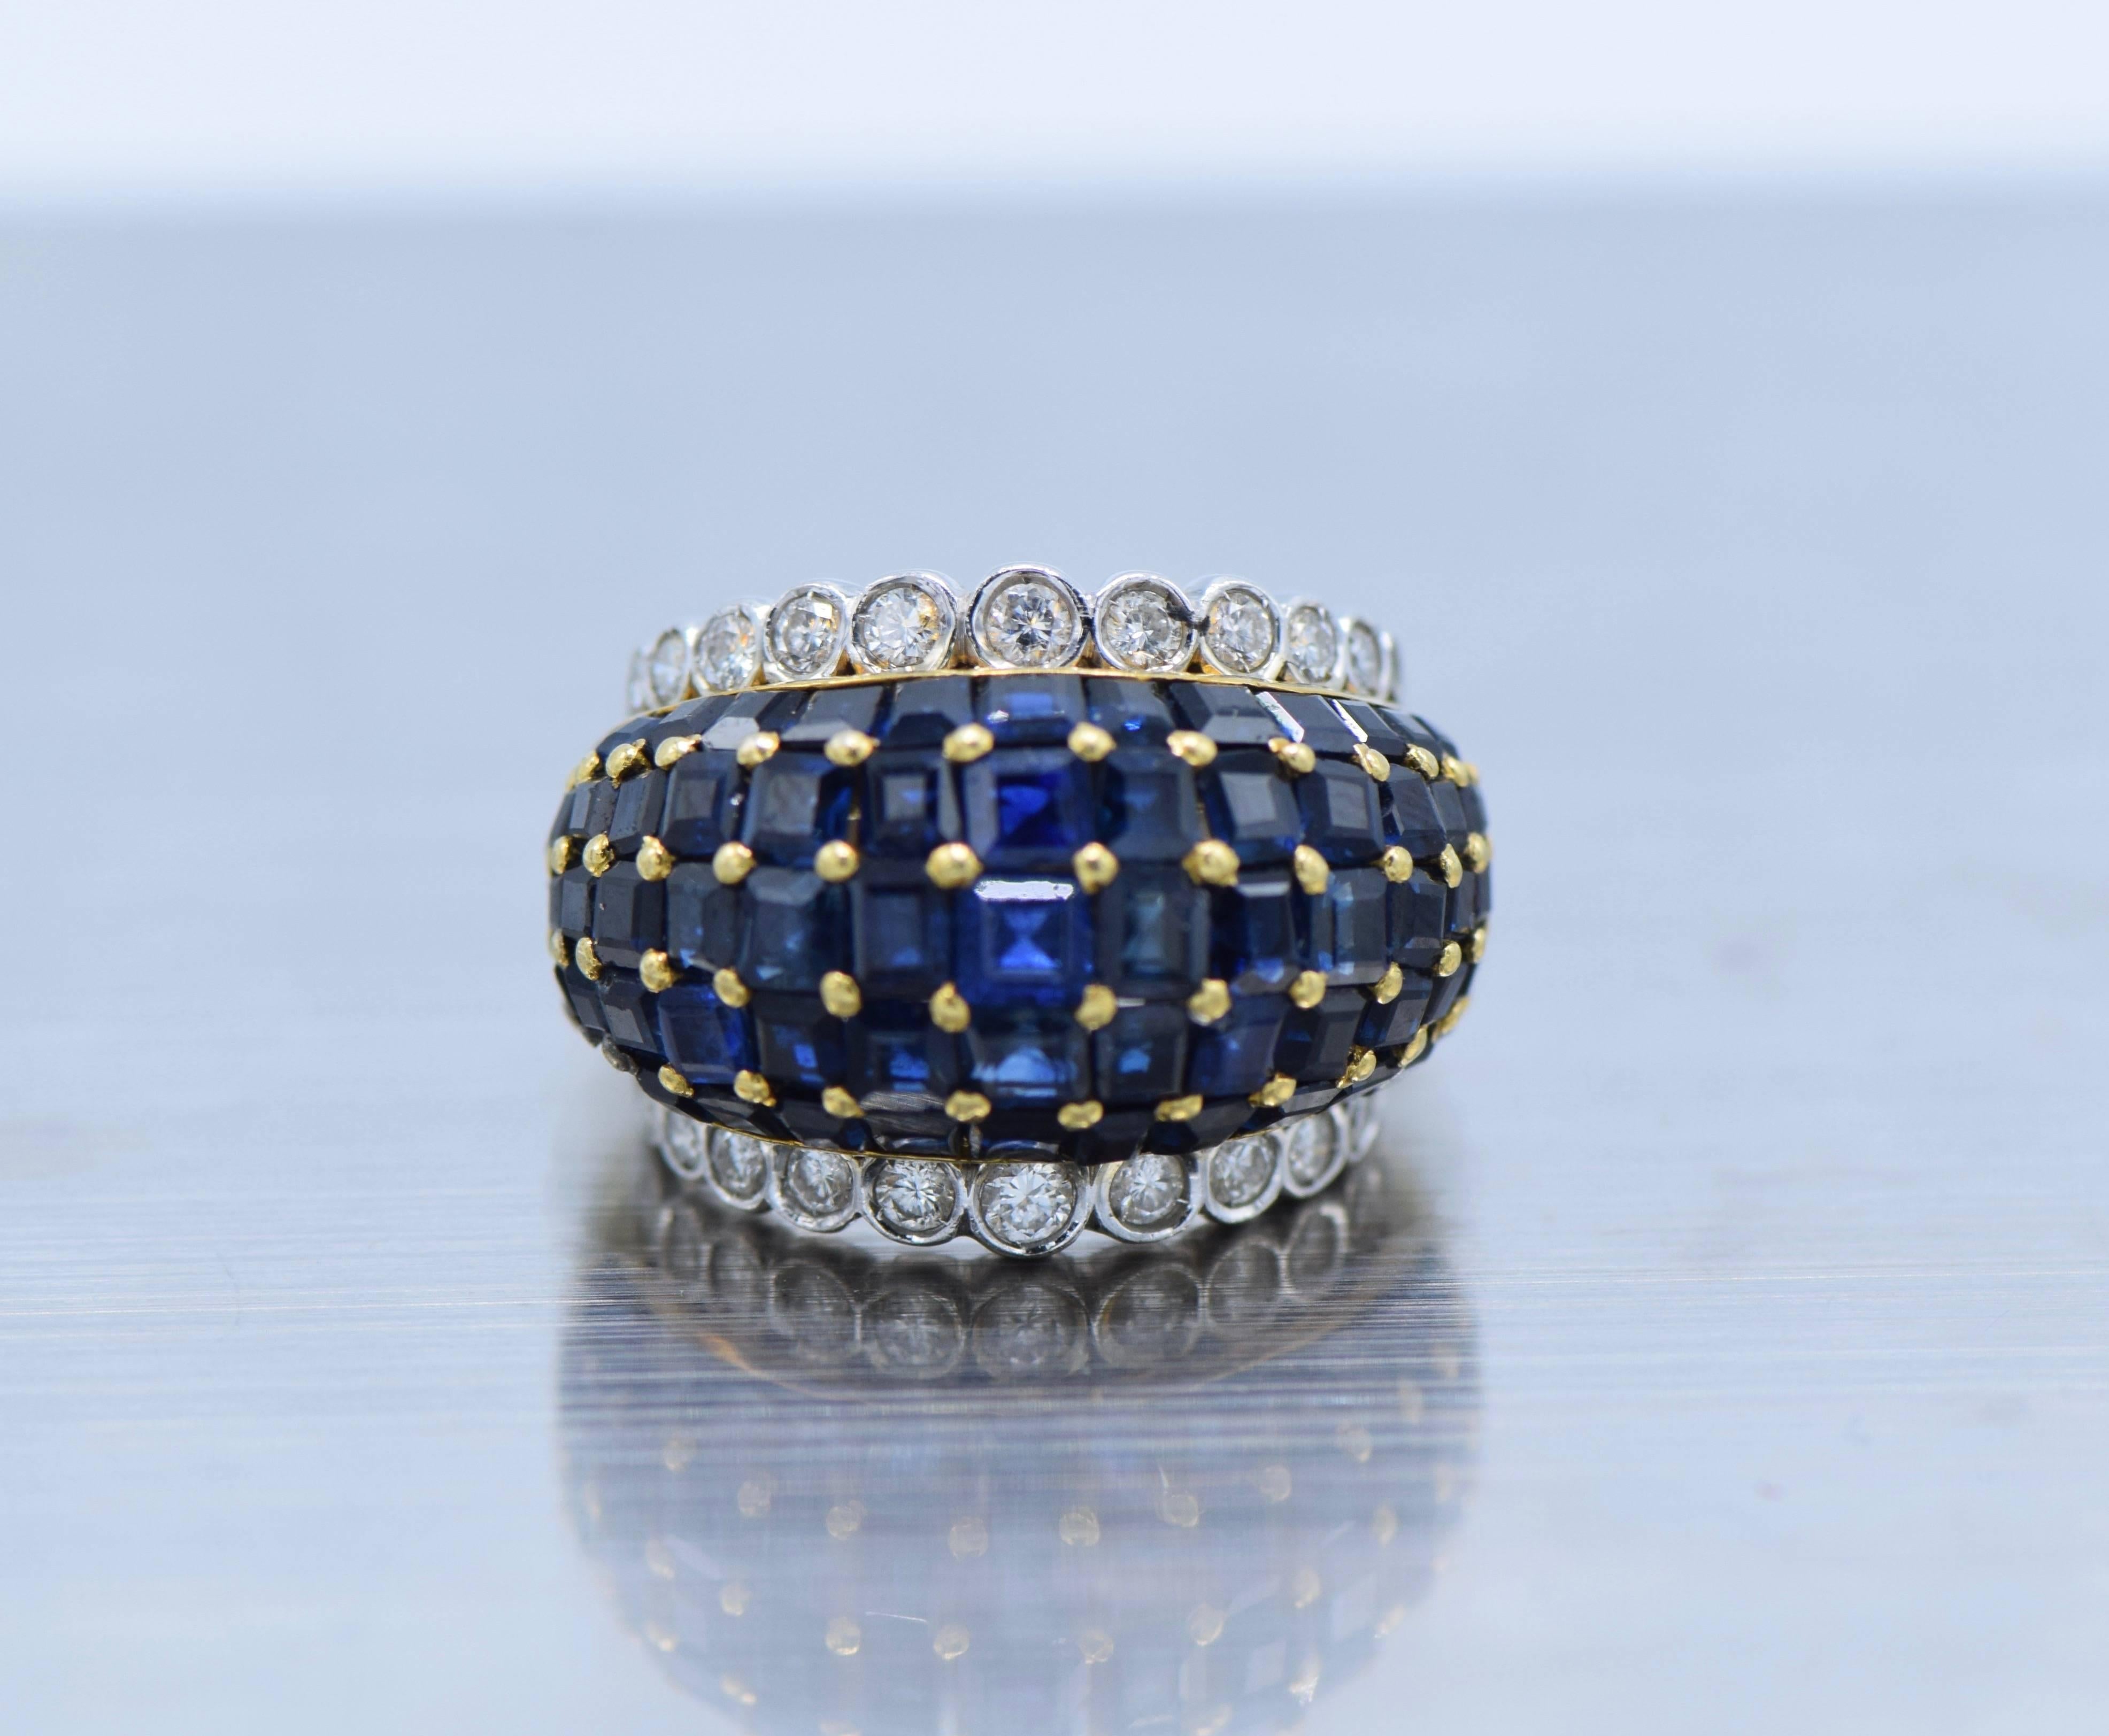 18 kt. yellow & white gold, 60 square-cut sapphires ap. 5.25 cts., 22 round & single-cut diamonds ap. .95 ct., ap. 10.7 dwts. 

Size 4 1/2. 

Sapphires: medium deep to dark royal blue, slightly included, 2 center stones chipped, several minor